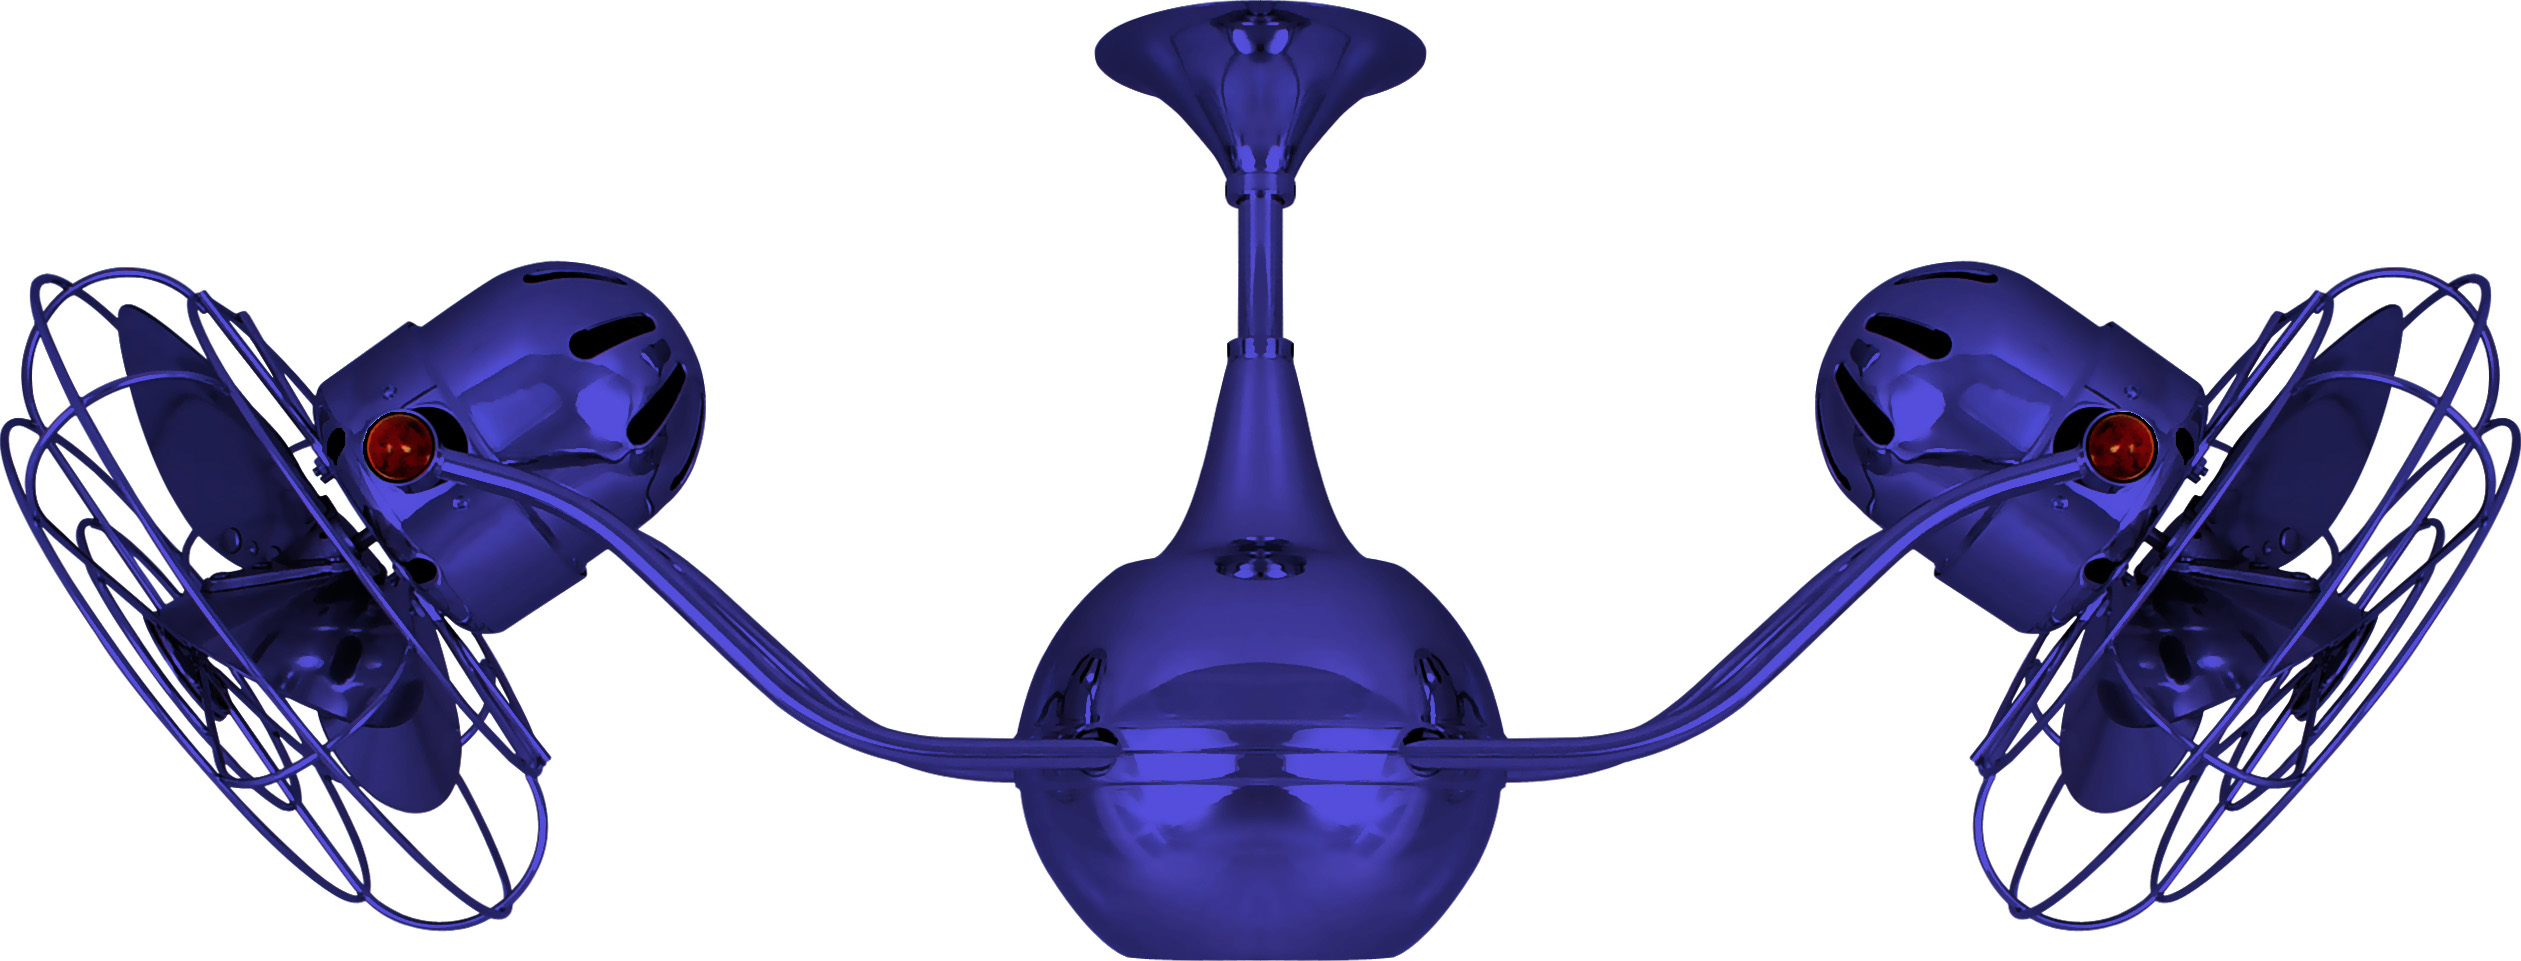 Vent-Bettina Rotational Dual Head Ceiling Fan in Safira / Blue Finish with Metal Blades and Decorative Cage